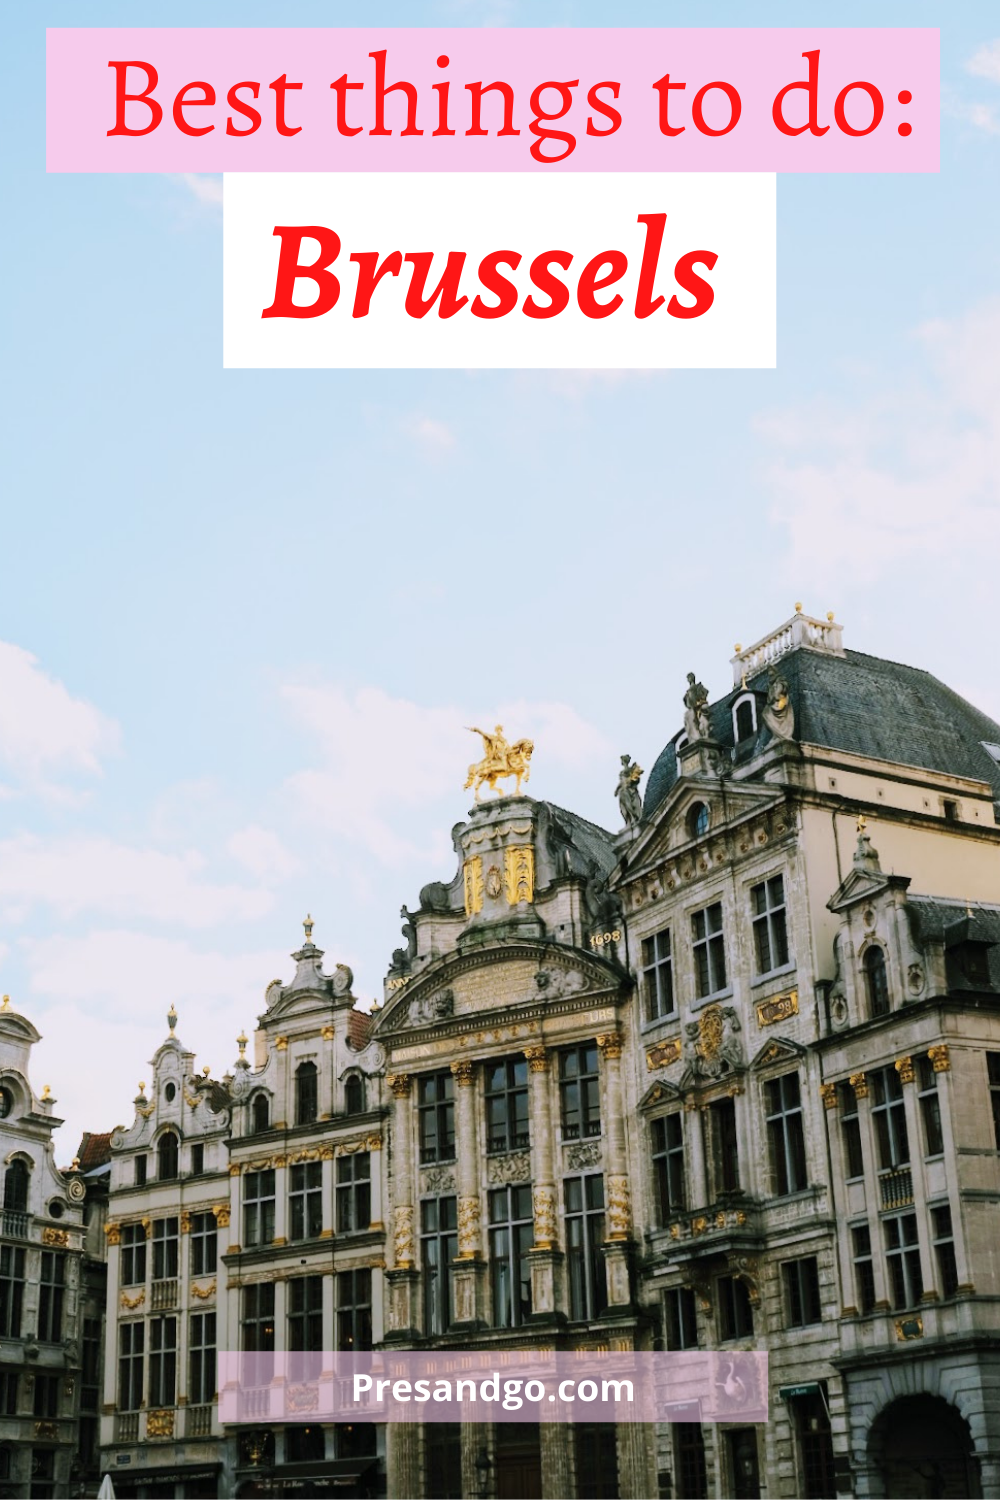 Best things to do in Brussels, Belgium